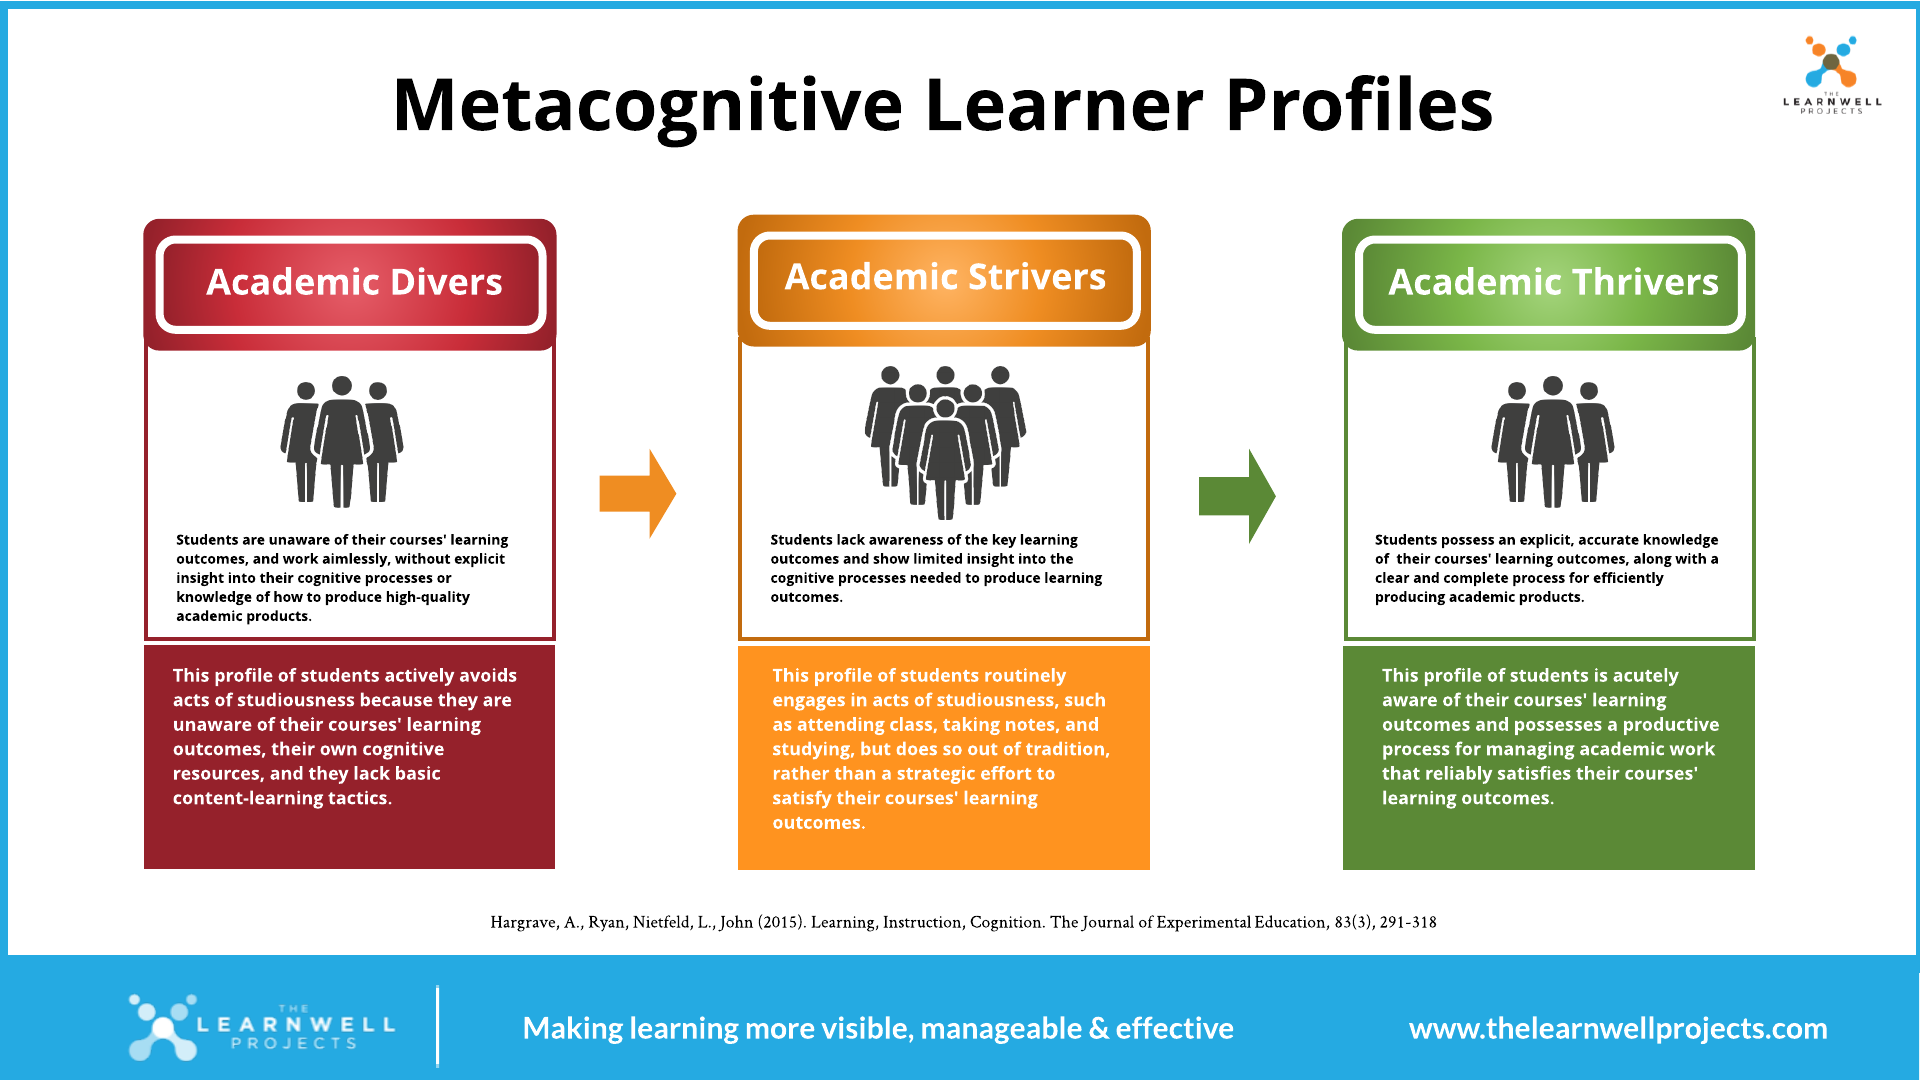 Academic Divers, Strivers and Thrivers: Metacognitive Learner Profiles